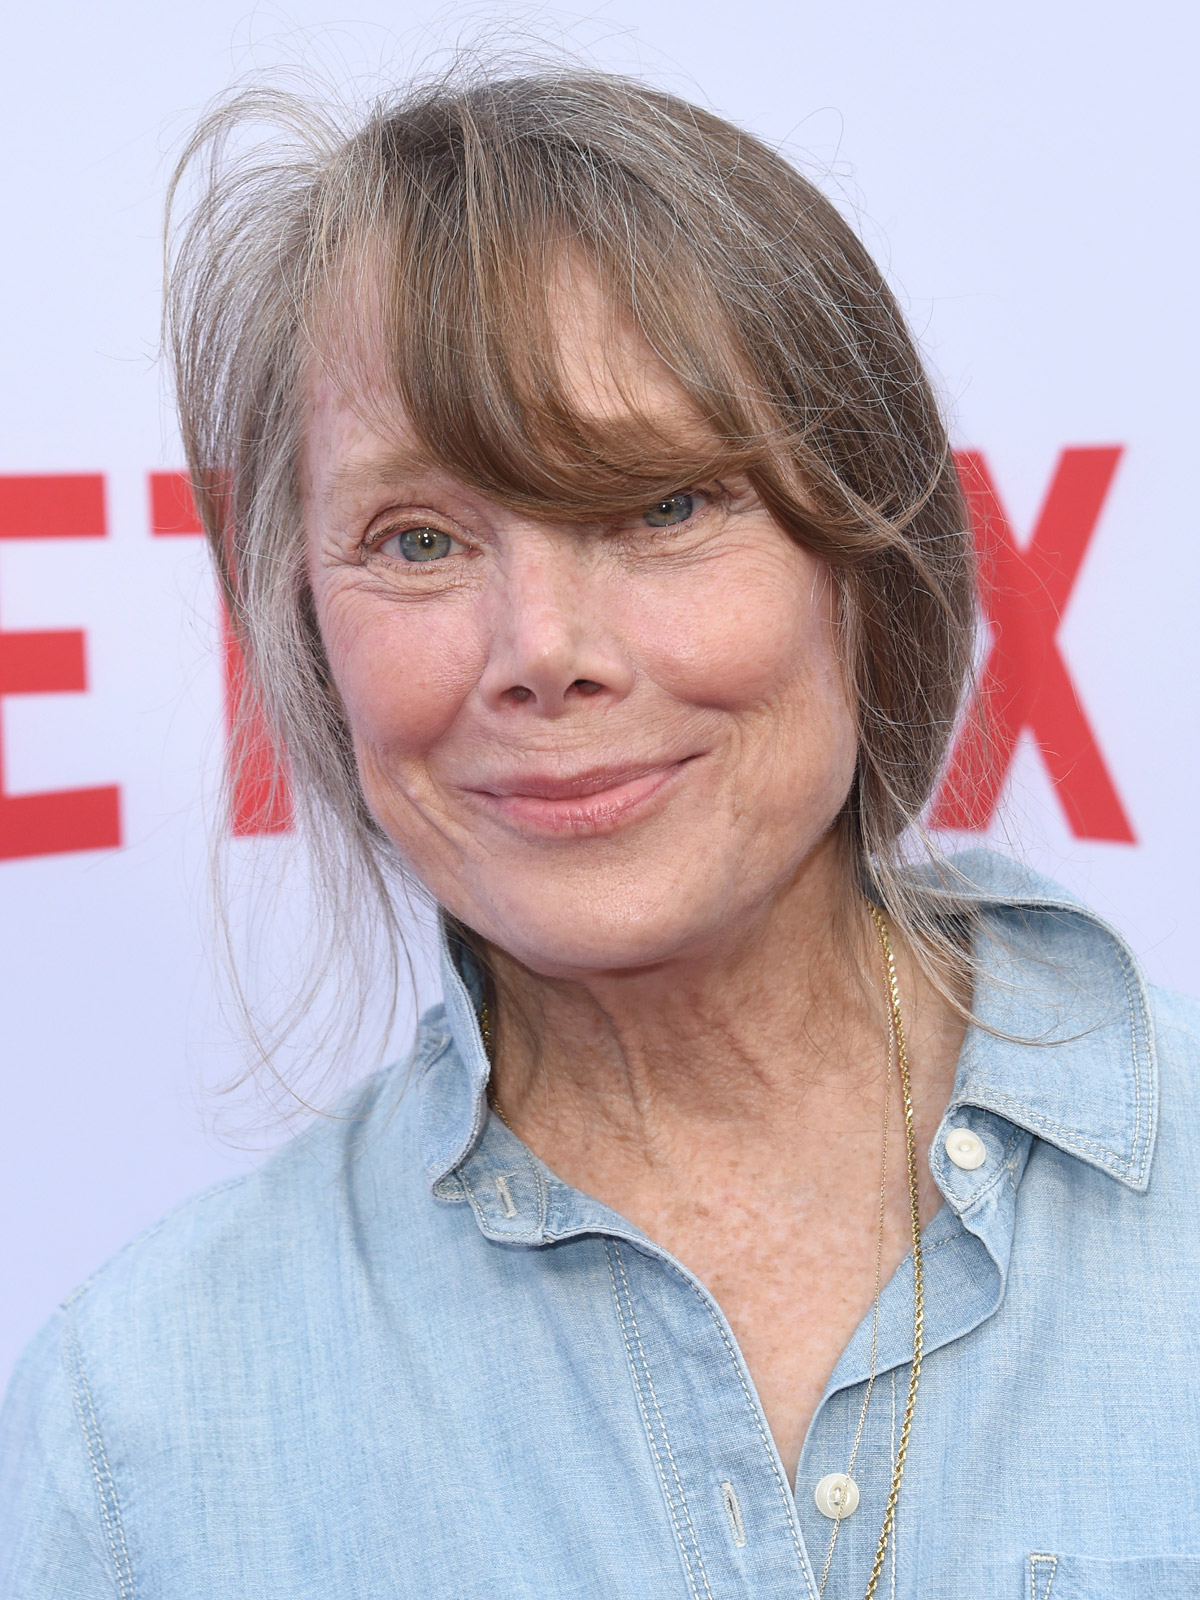 Sissy spacek is one of these three artists.